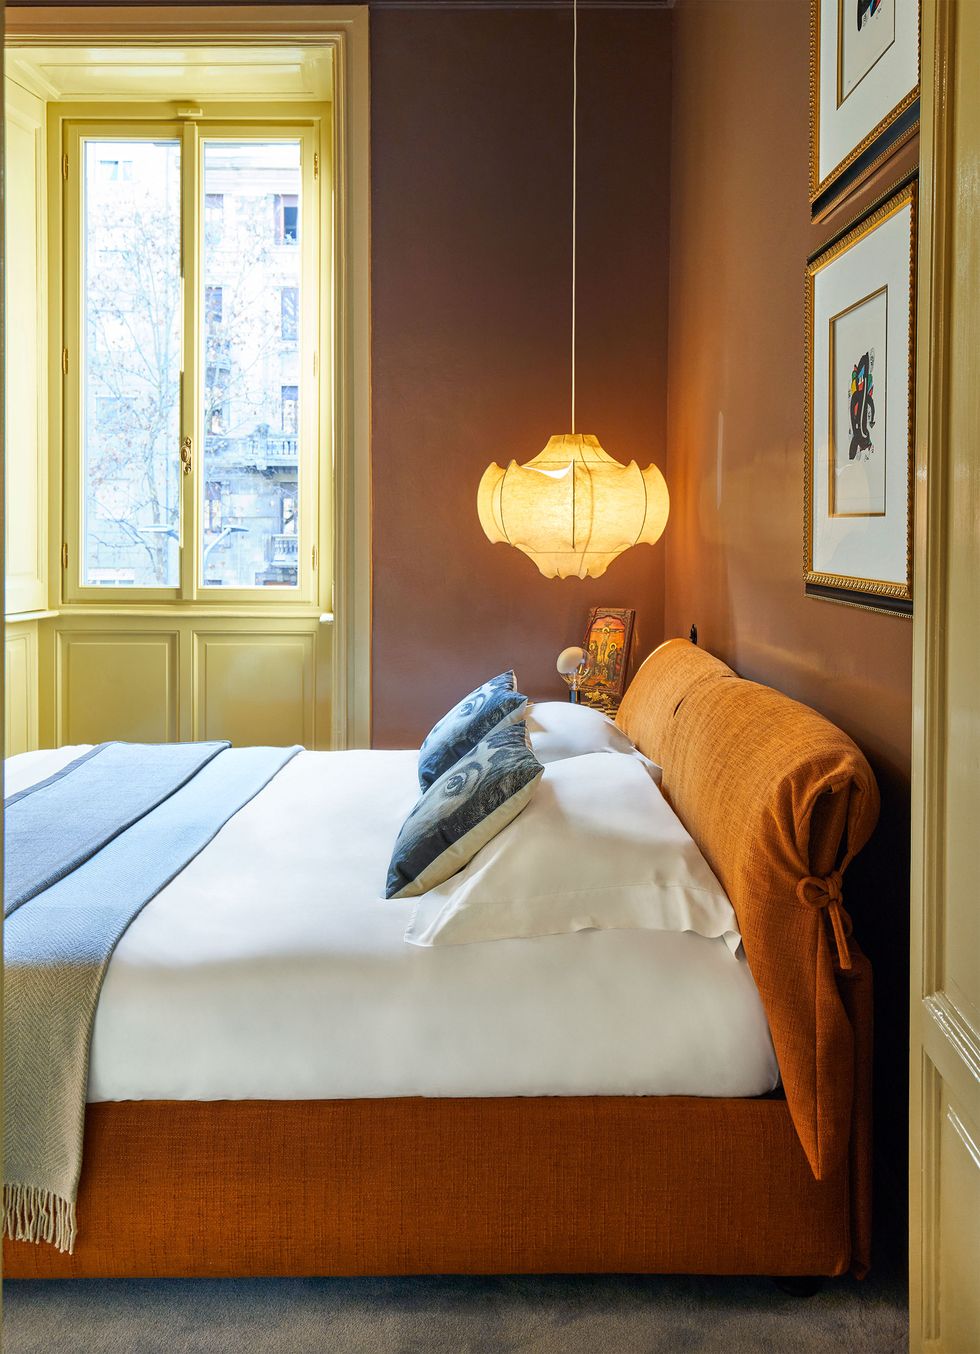 The door to the master bedroom opens to reveal a bed with an orange fabric headboard and a base with white linens and colored cushions, a pendant hanging above it, brown walls, and a window. The trim is green beige